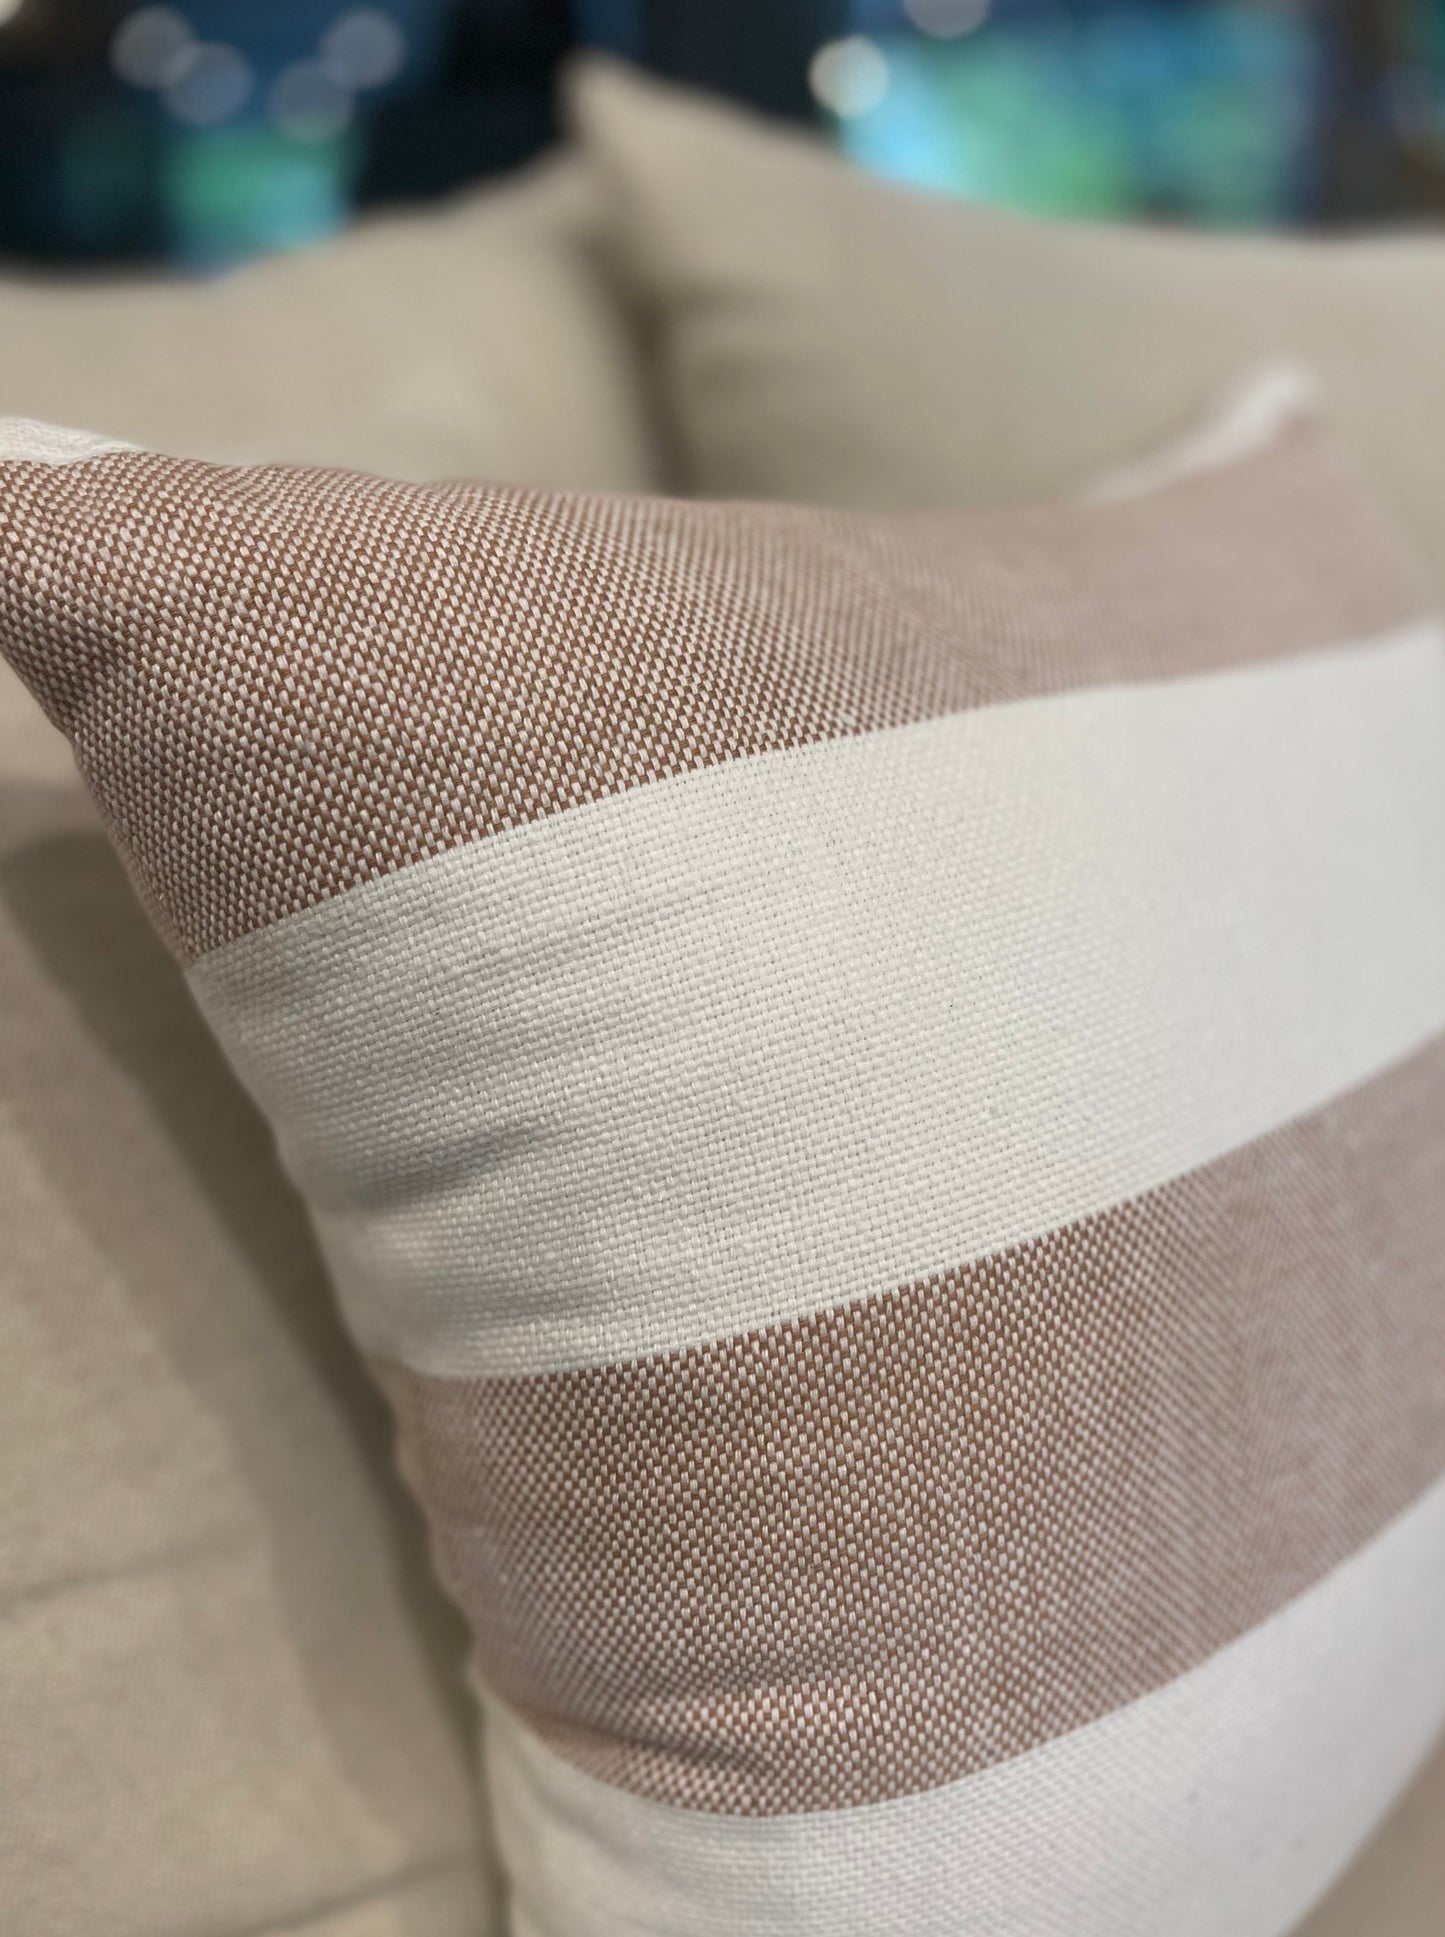 Our Lyon Handwoven Cotton Cushion boasts sleek stripes and provides versatile styling, ideal for complementing sofas and beds. Its luxurious Dacron insert adds additional comfort. Rust and white coloured.